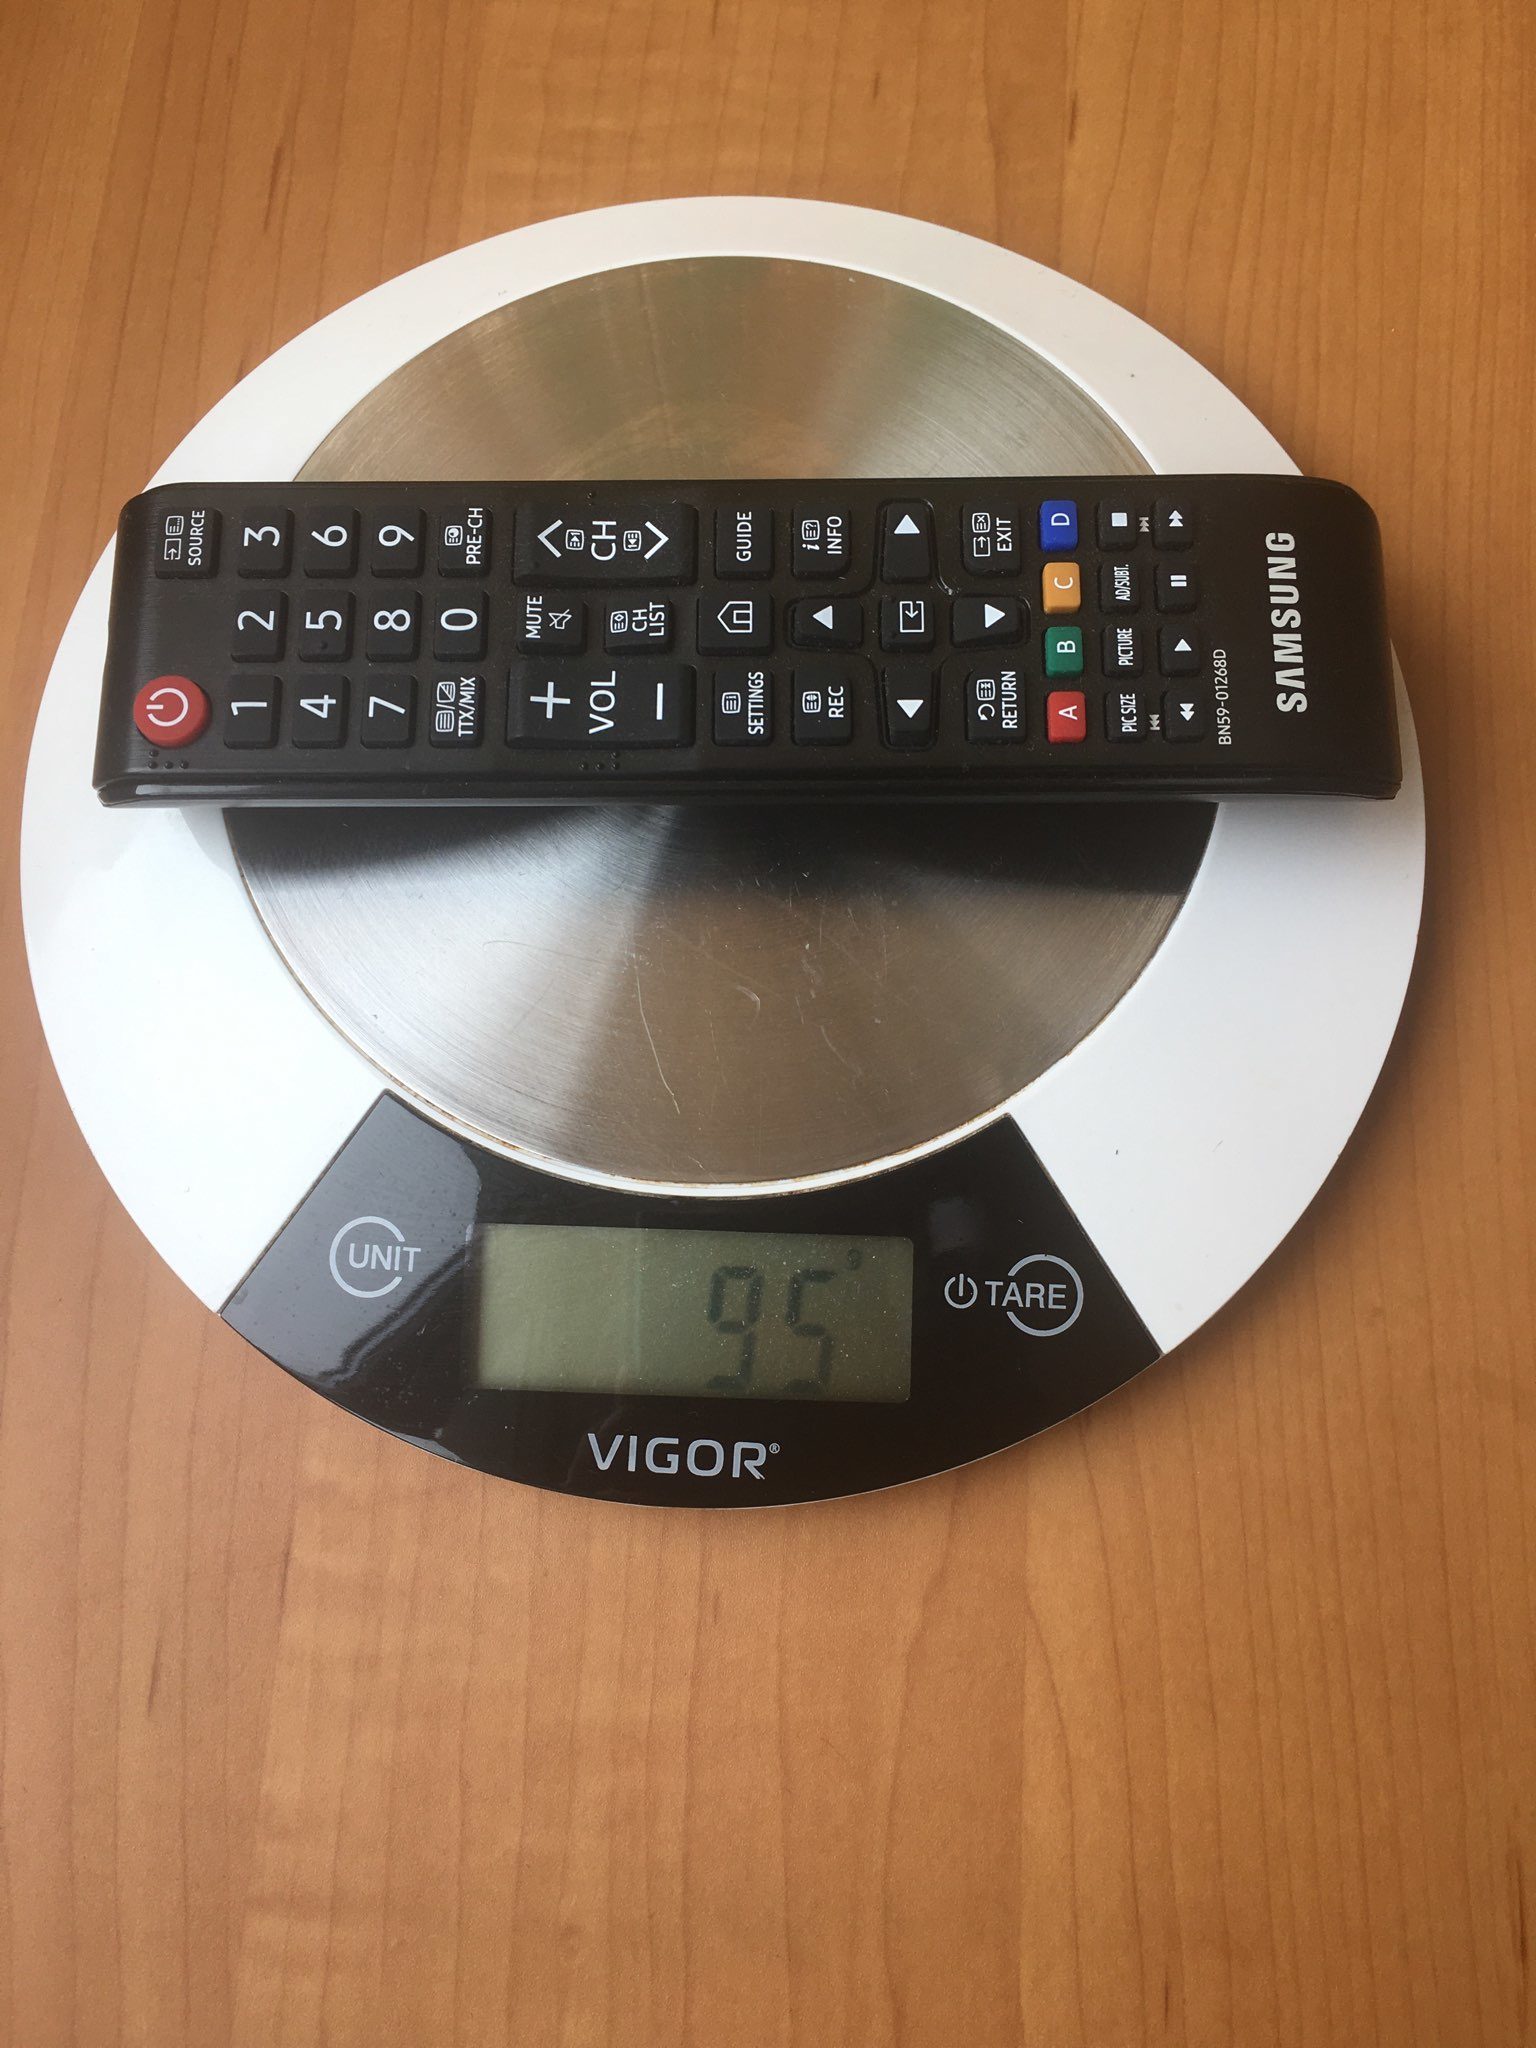 How much does the TV remote weigh?